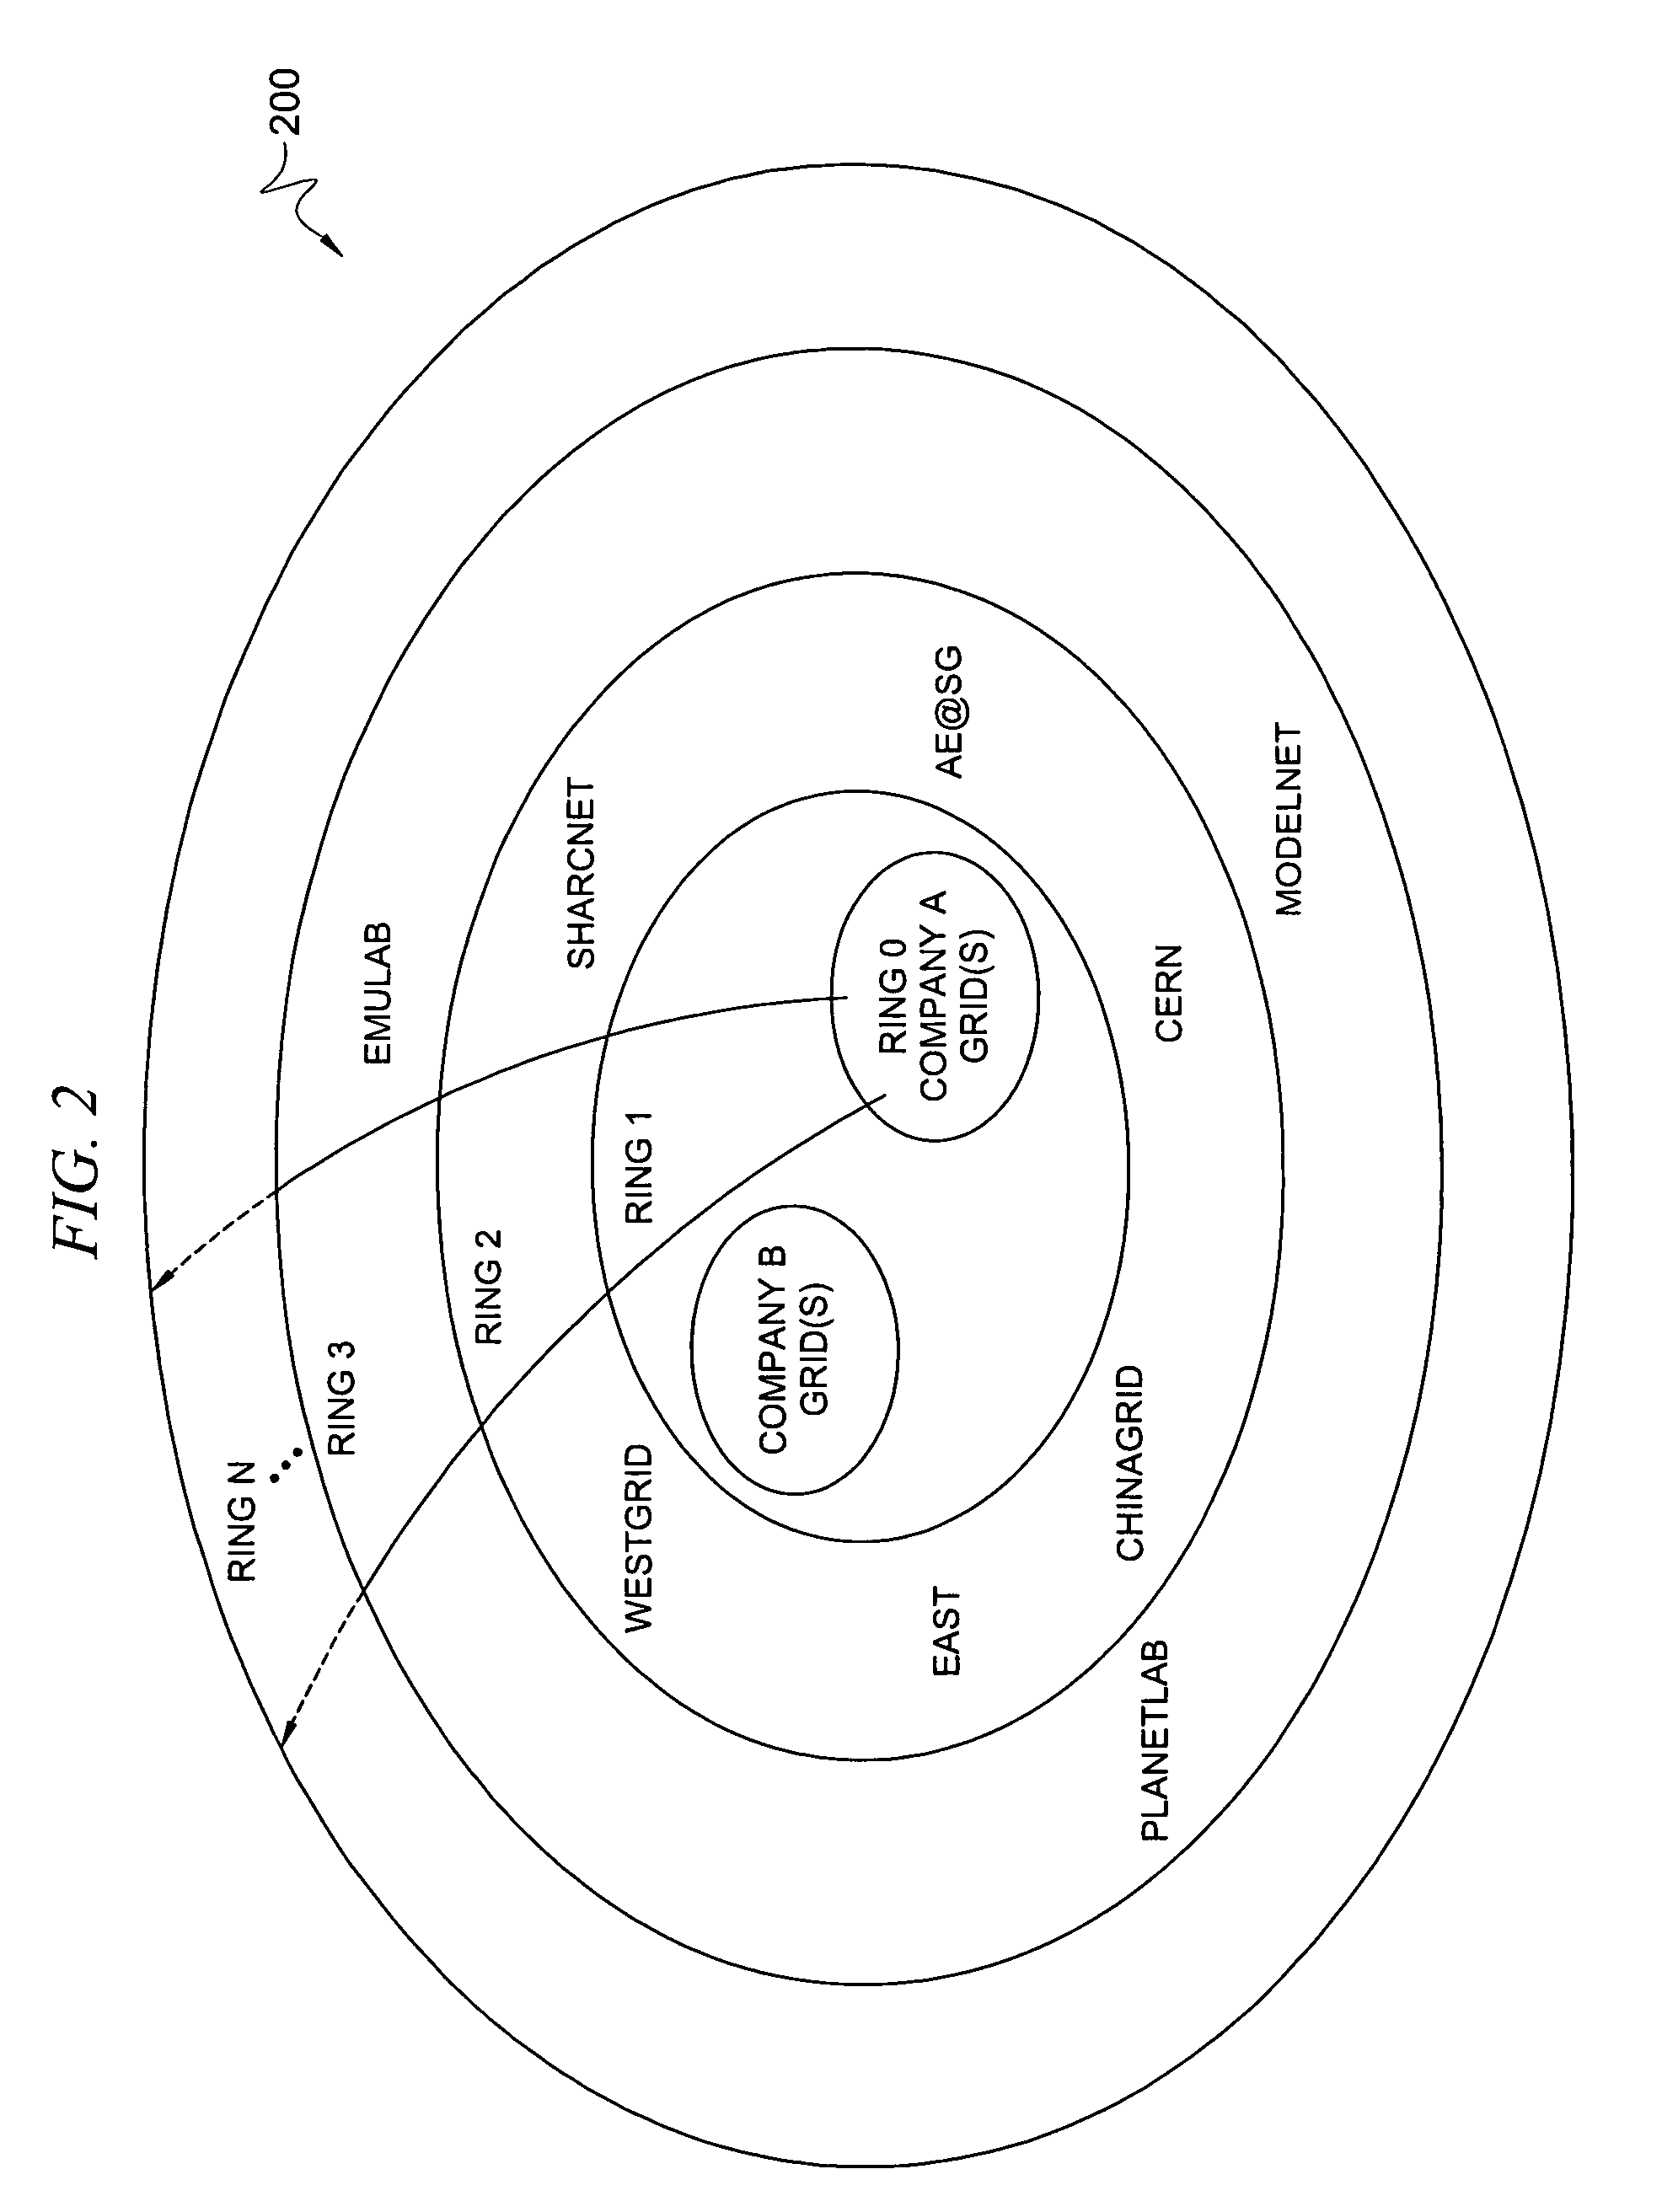 Federation of grids using rings of trust